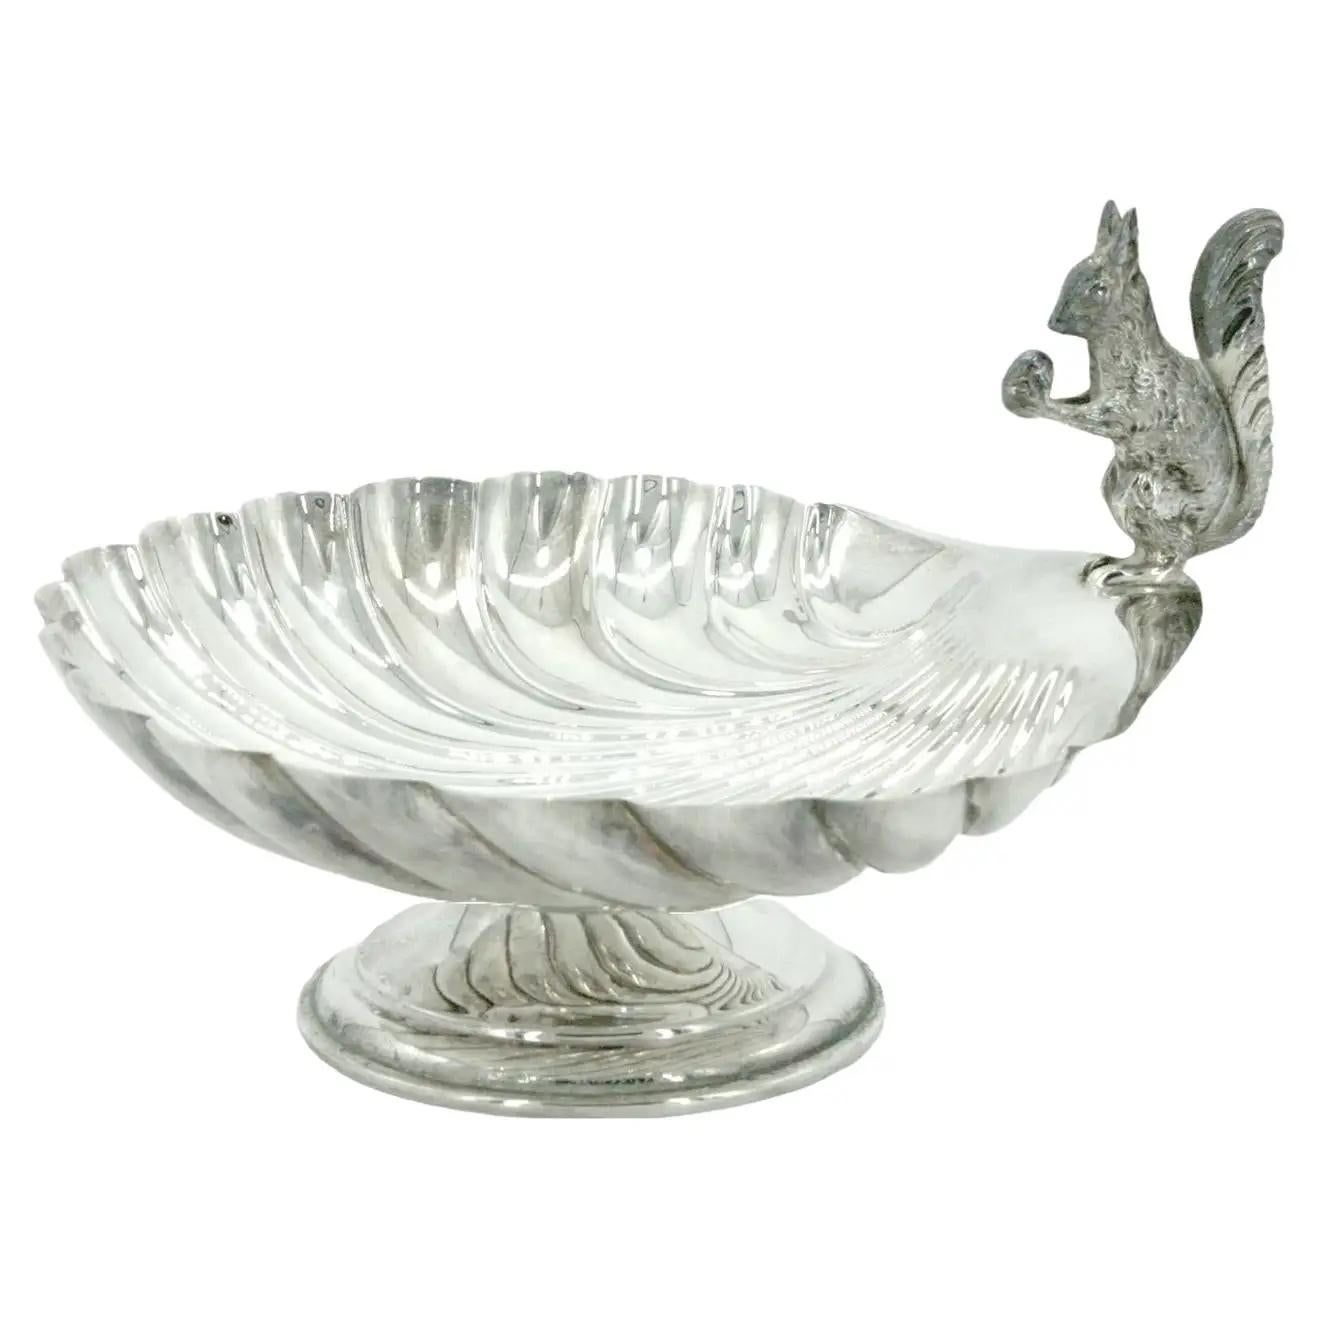 English Silver Plate Tableware Serving Piece For Sale 8